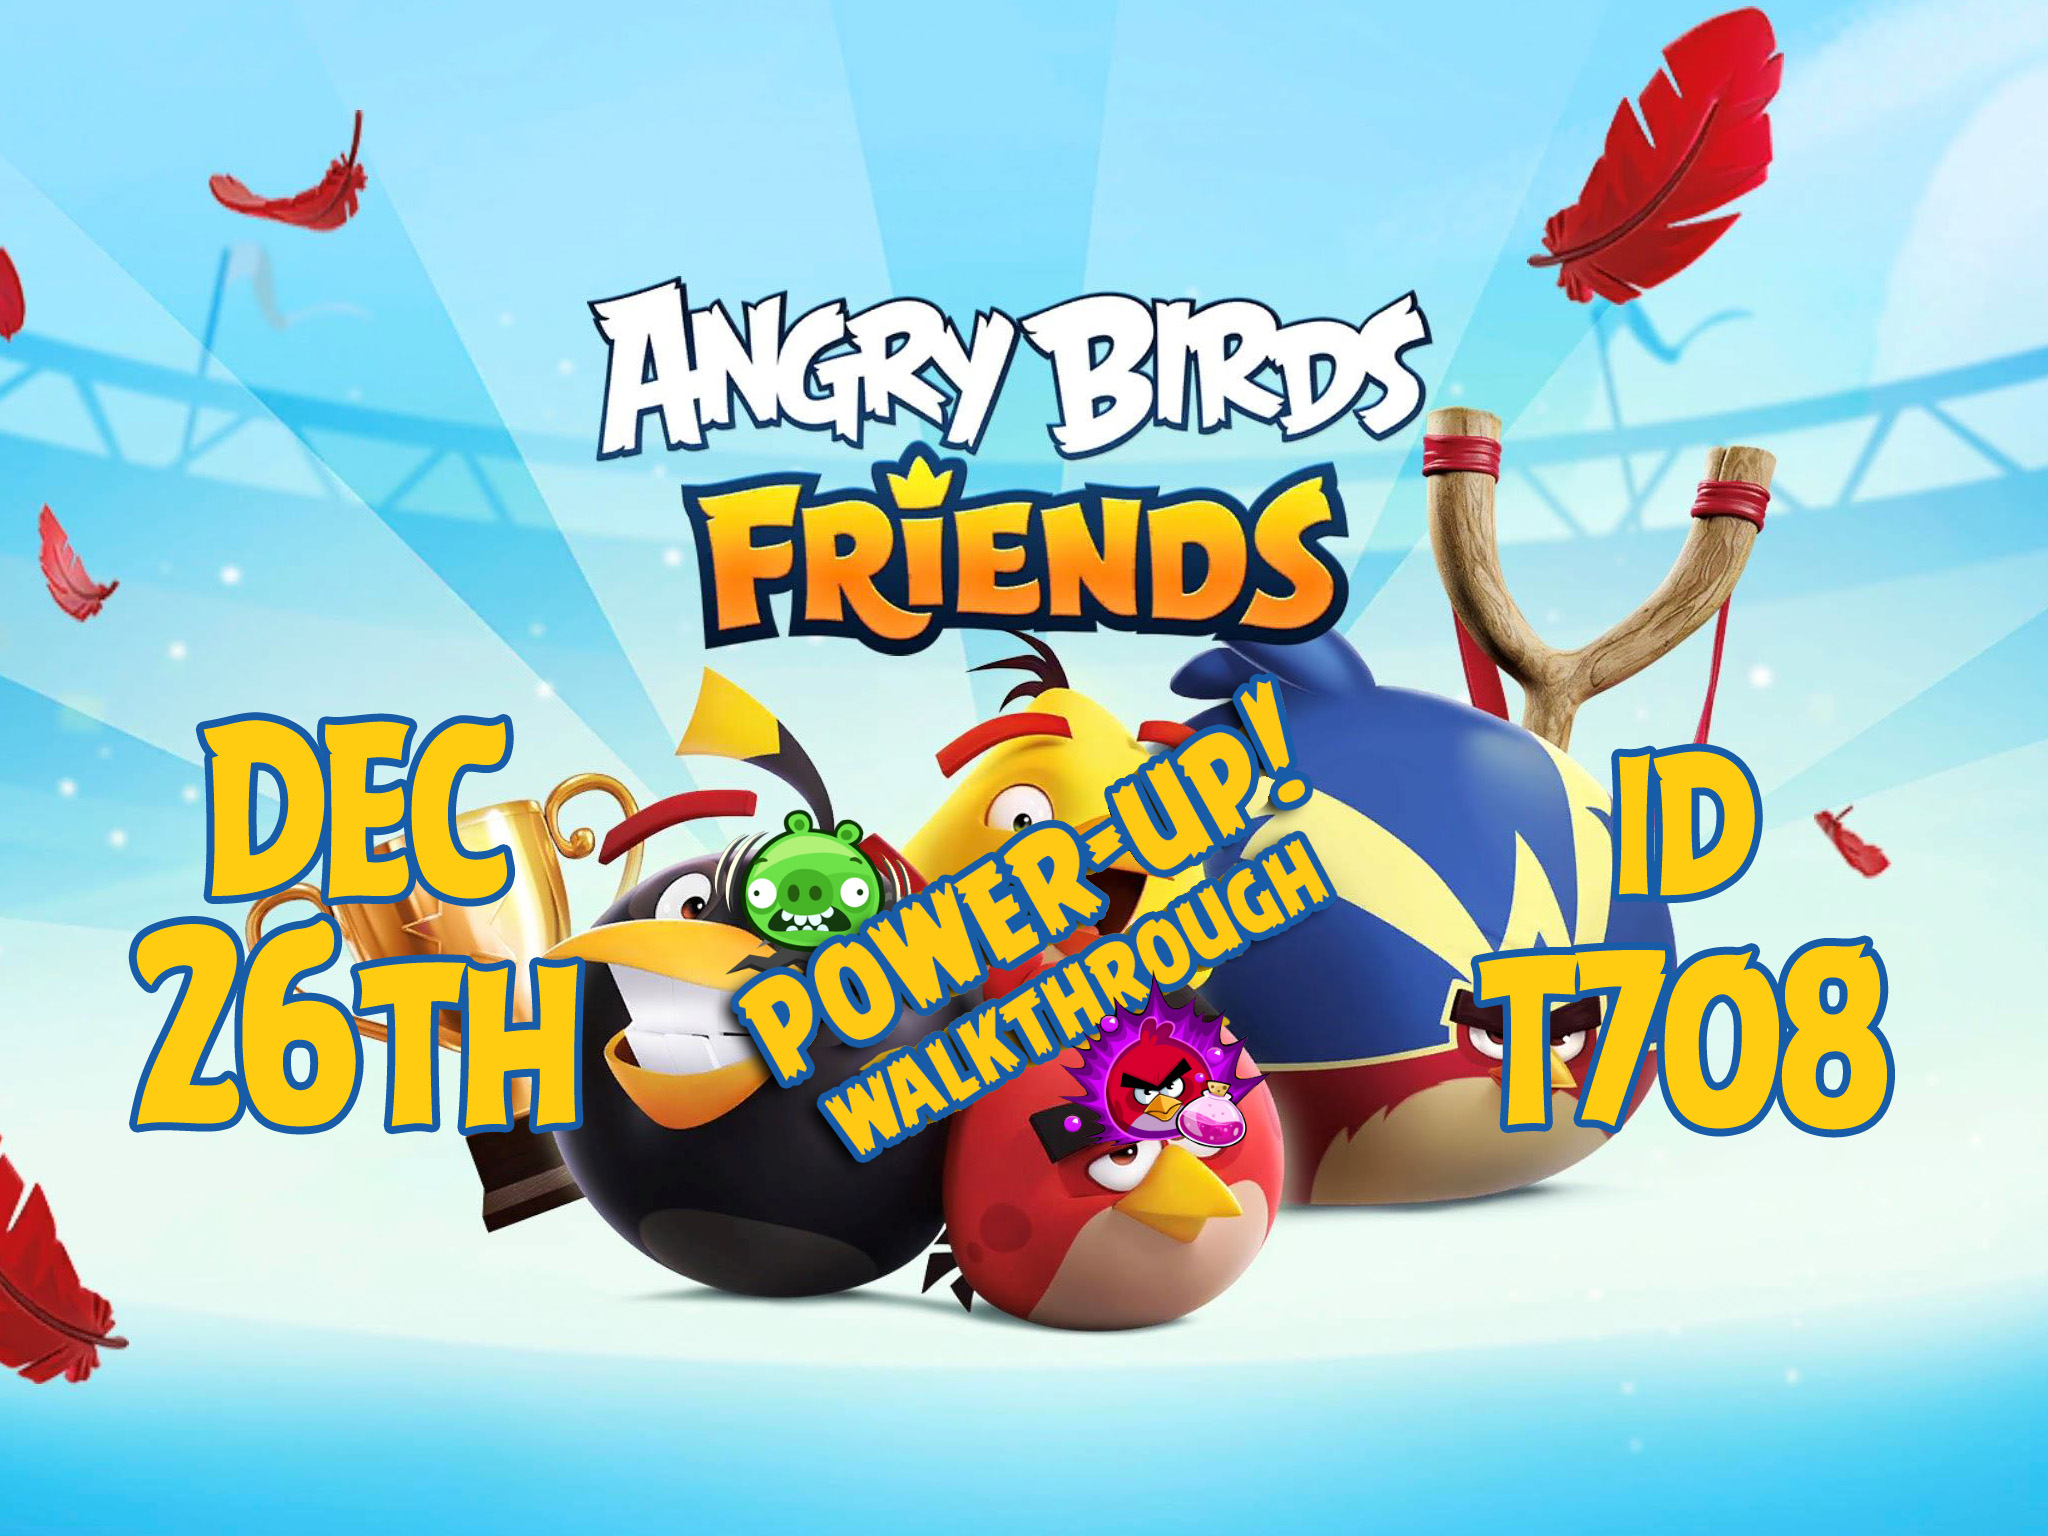 Angry-Birds-Friends-Tournament-T708-Feature-Image-PU